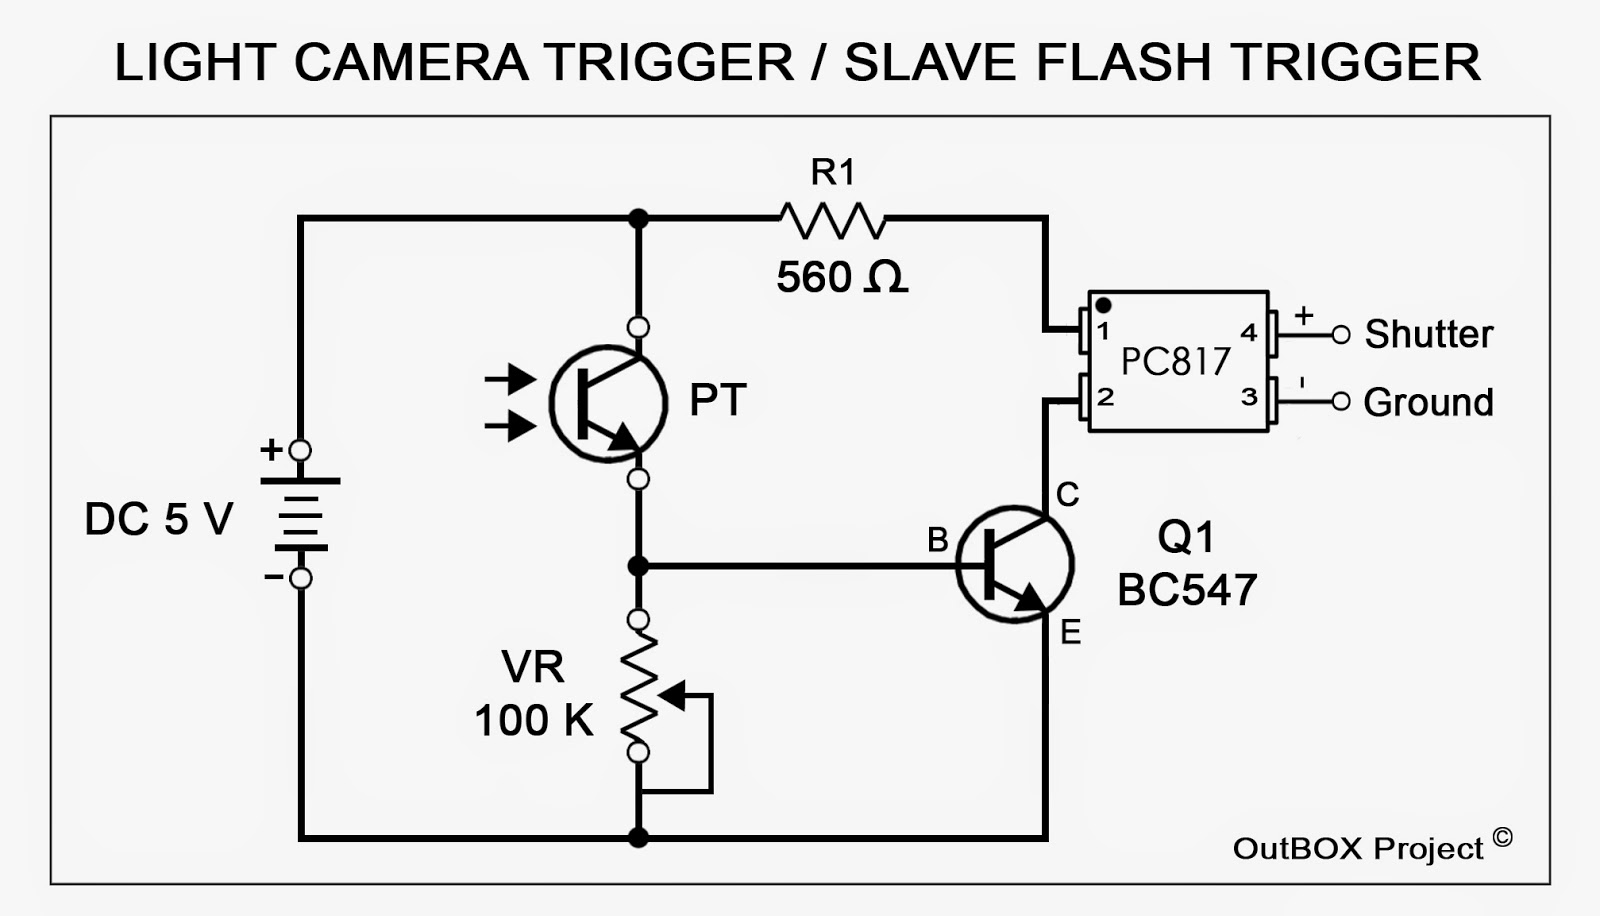 - OutBox Project: Hack Sync Flash / Light Trigger for Camera/ Slave Flash Trigger